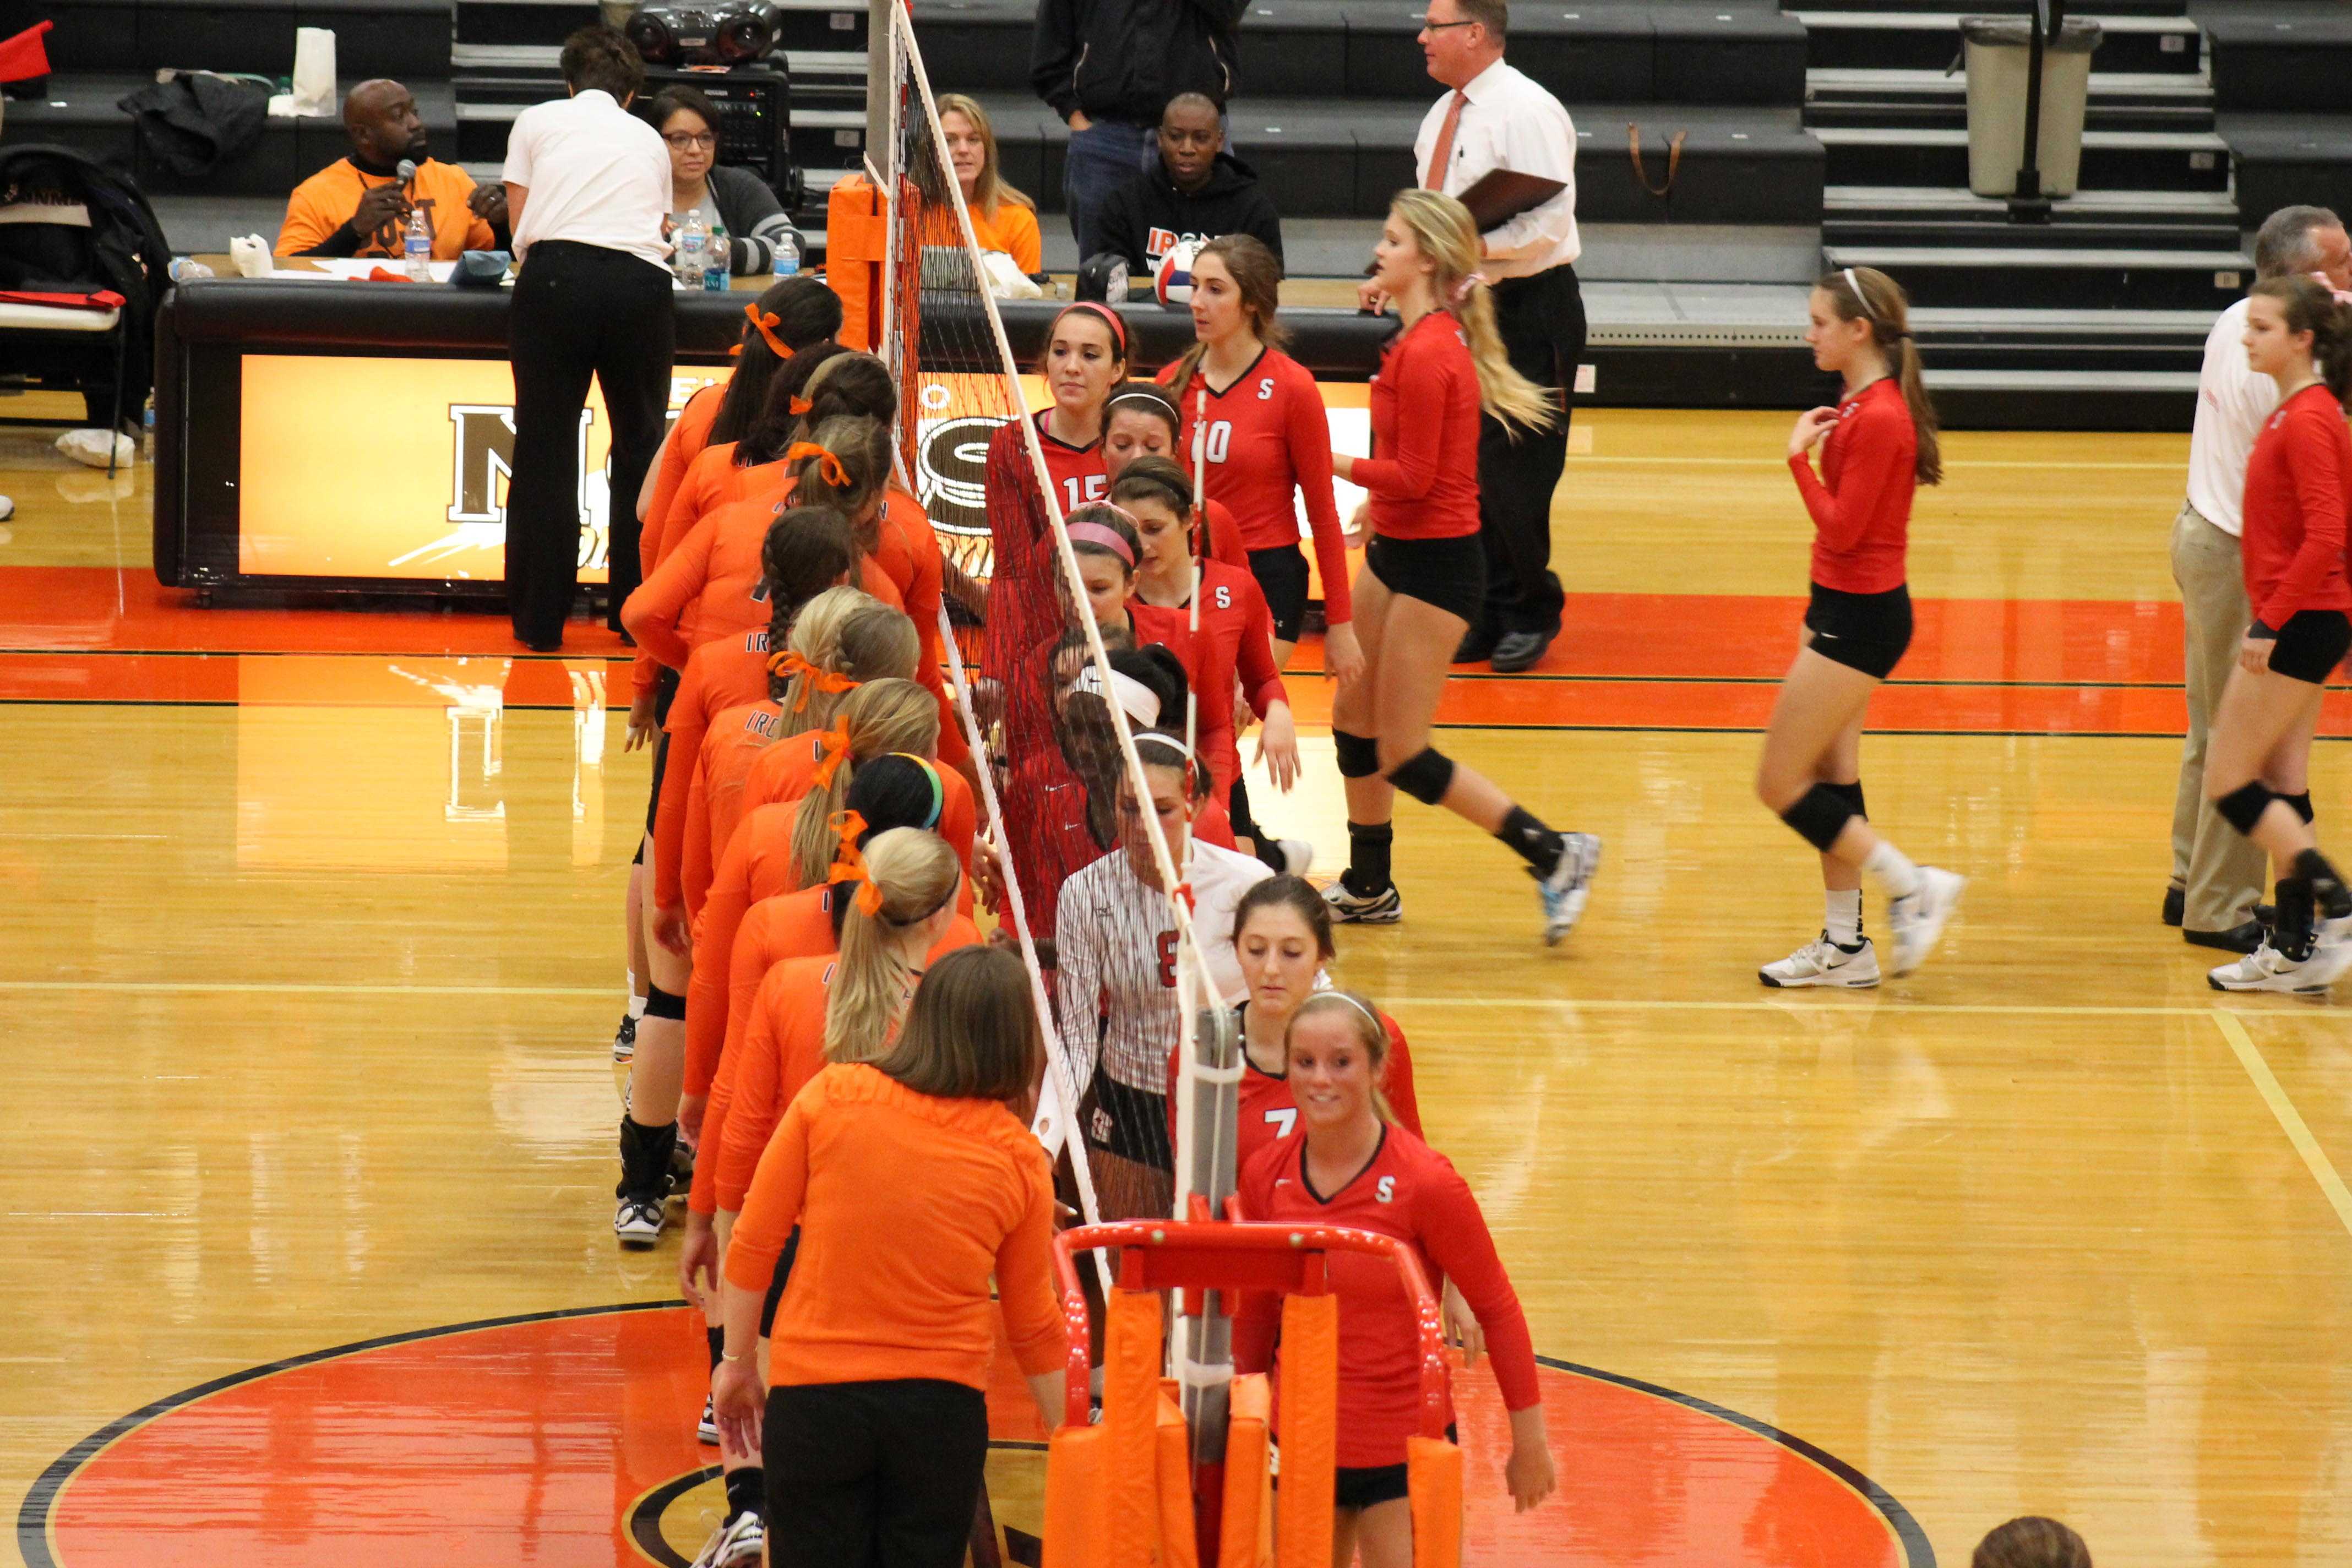 Lady Iron congratulate their opponents after winning the Sectional title in 3 games.